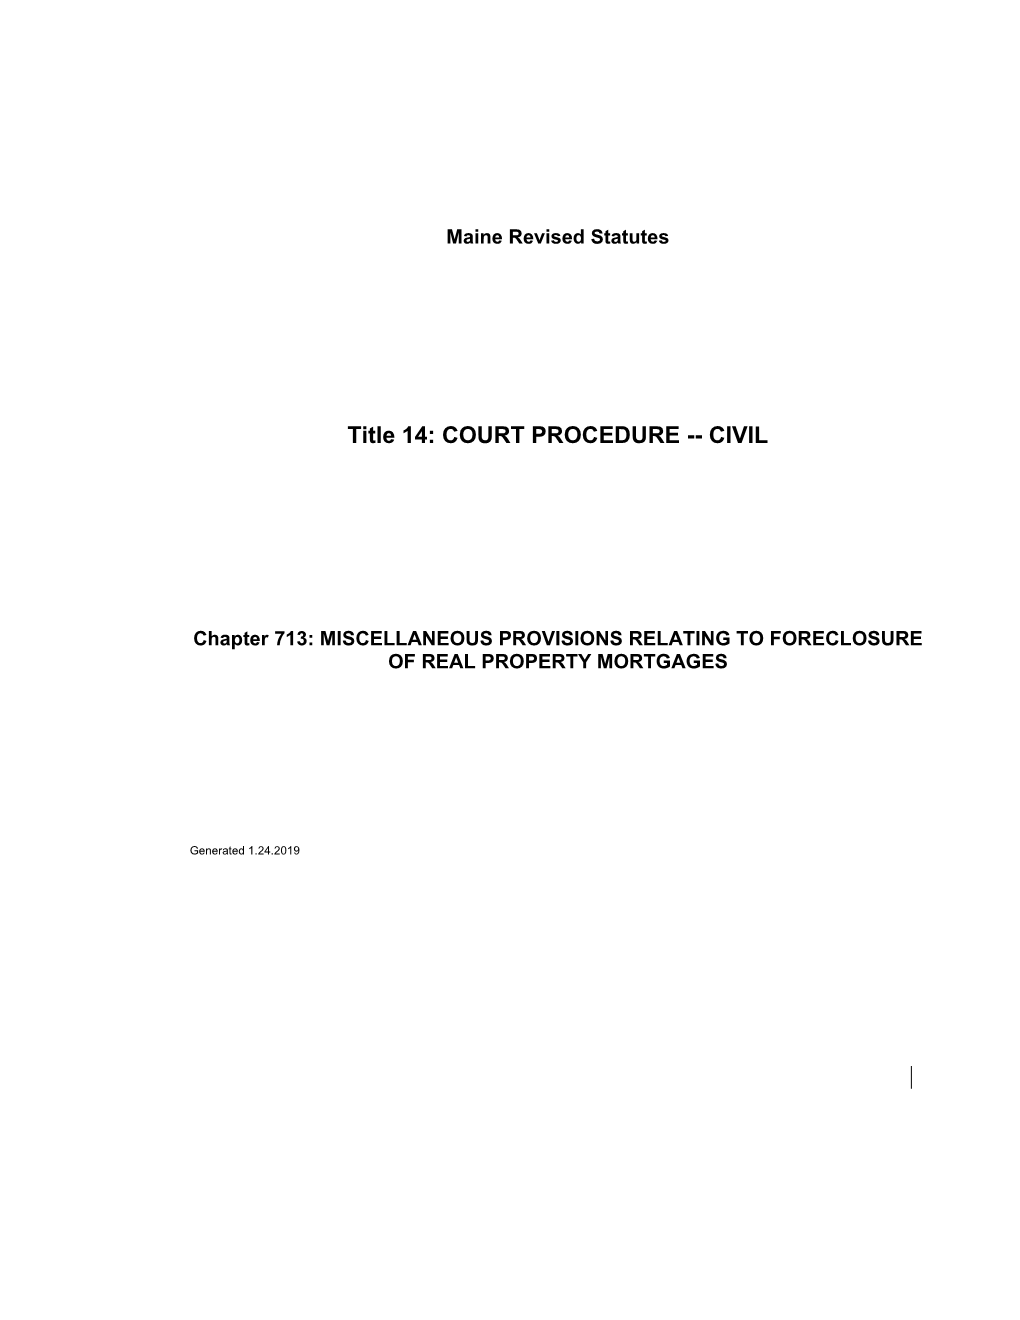 MRS Title 14 6321. COMMENCEMENT of FORECLOSURE by CIVIL ACTION